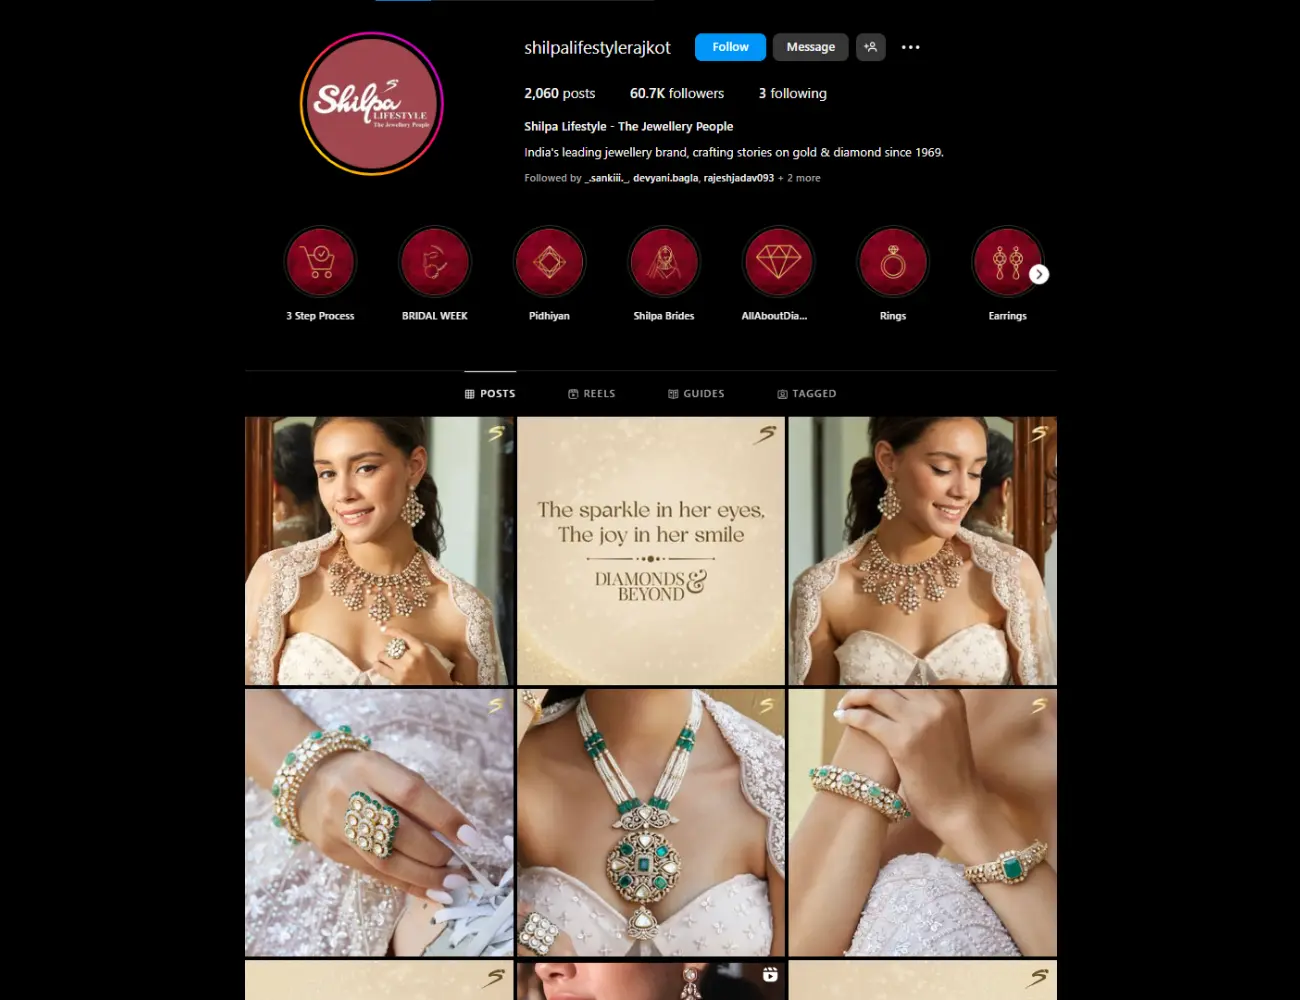 An Instagram feed of a jewellery brand